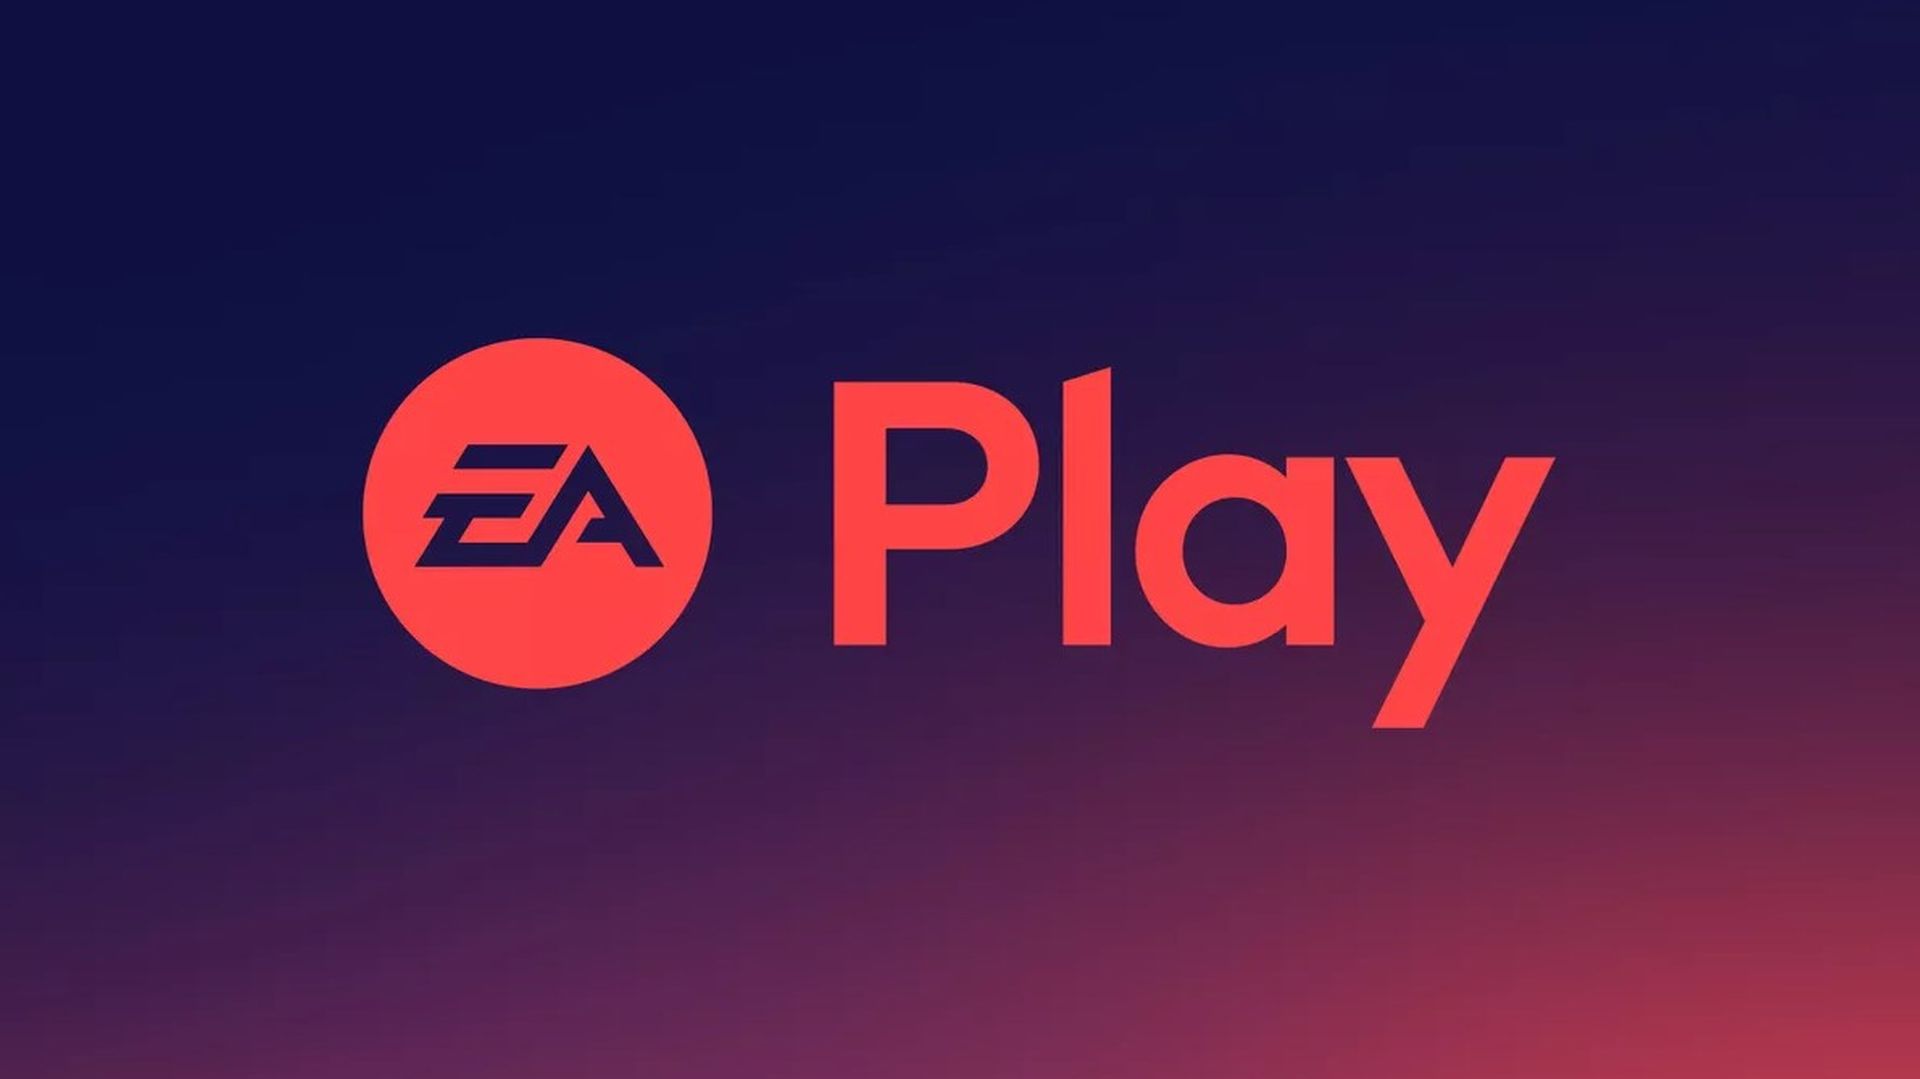 EA Play Coming to Steam on August 31st